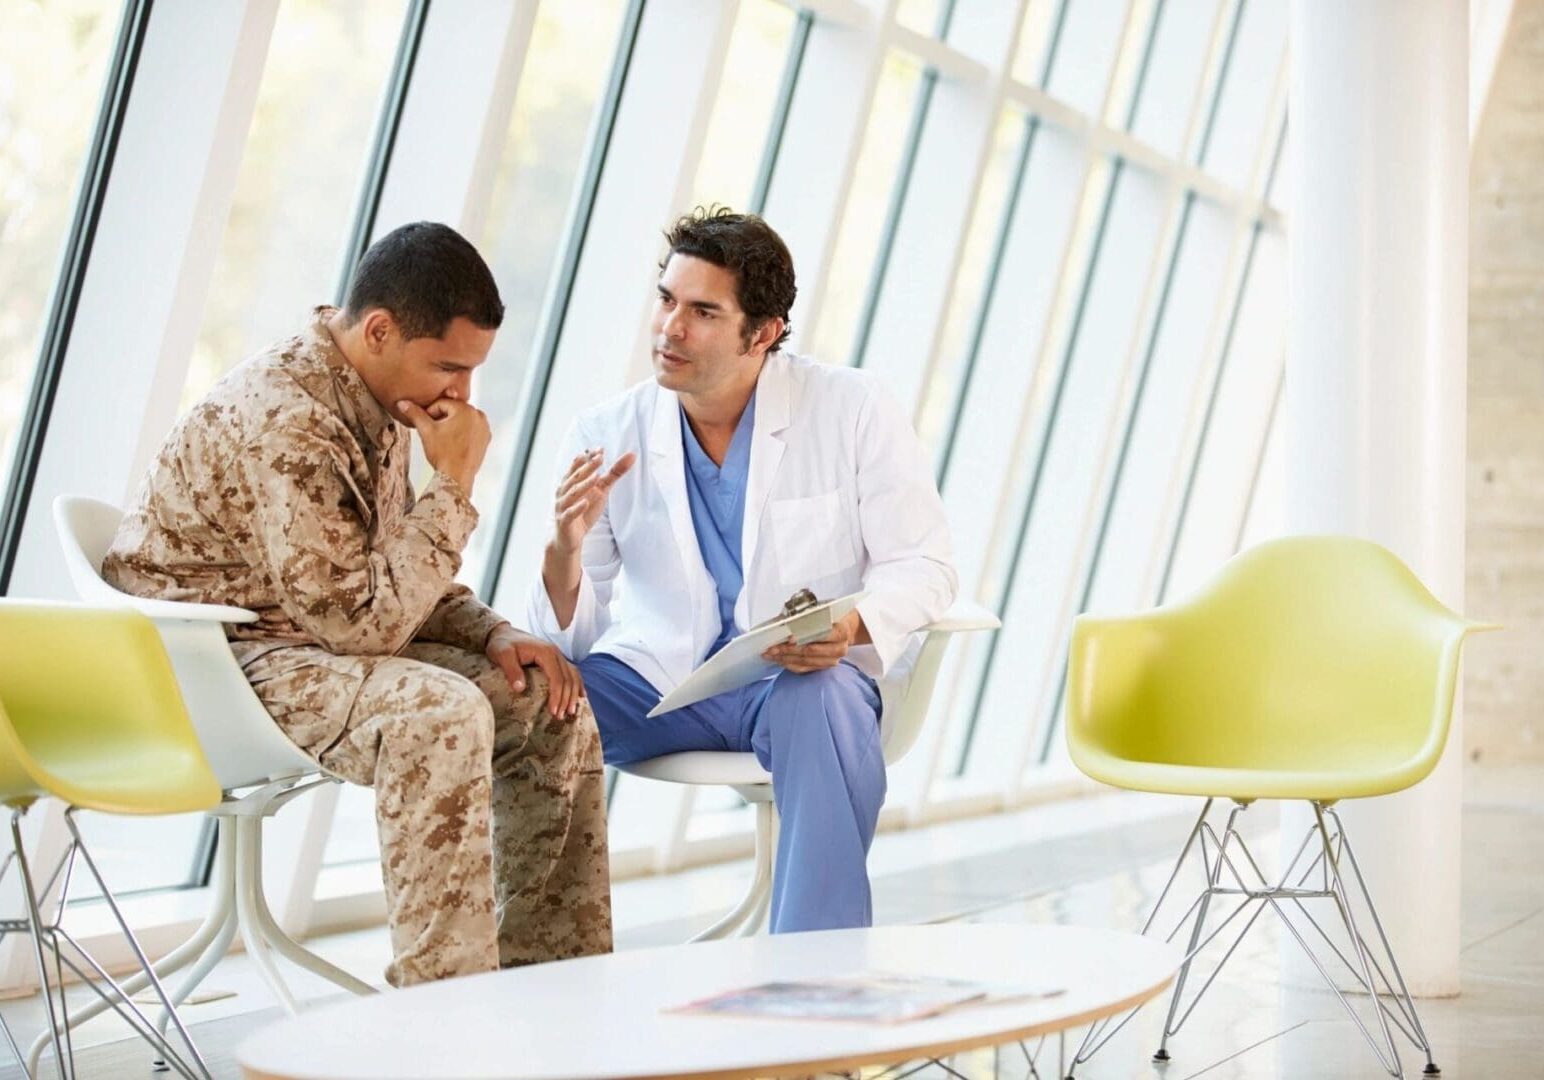 A doctor in a white coat consults with a soldier in camouflage uniform about online education in a modern, bright waiting room with large windows.